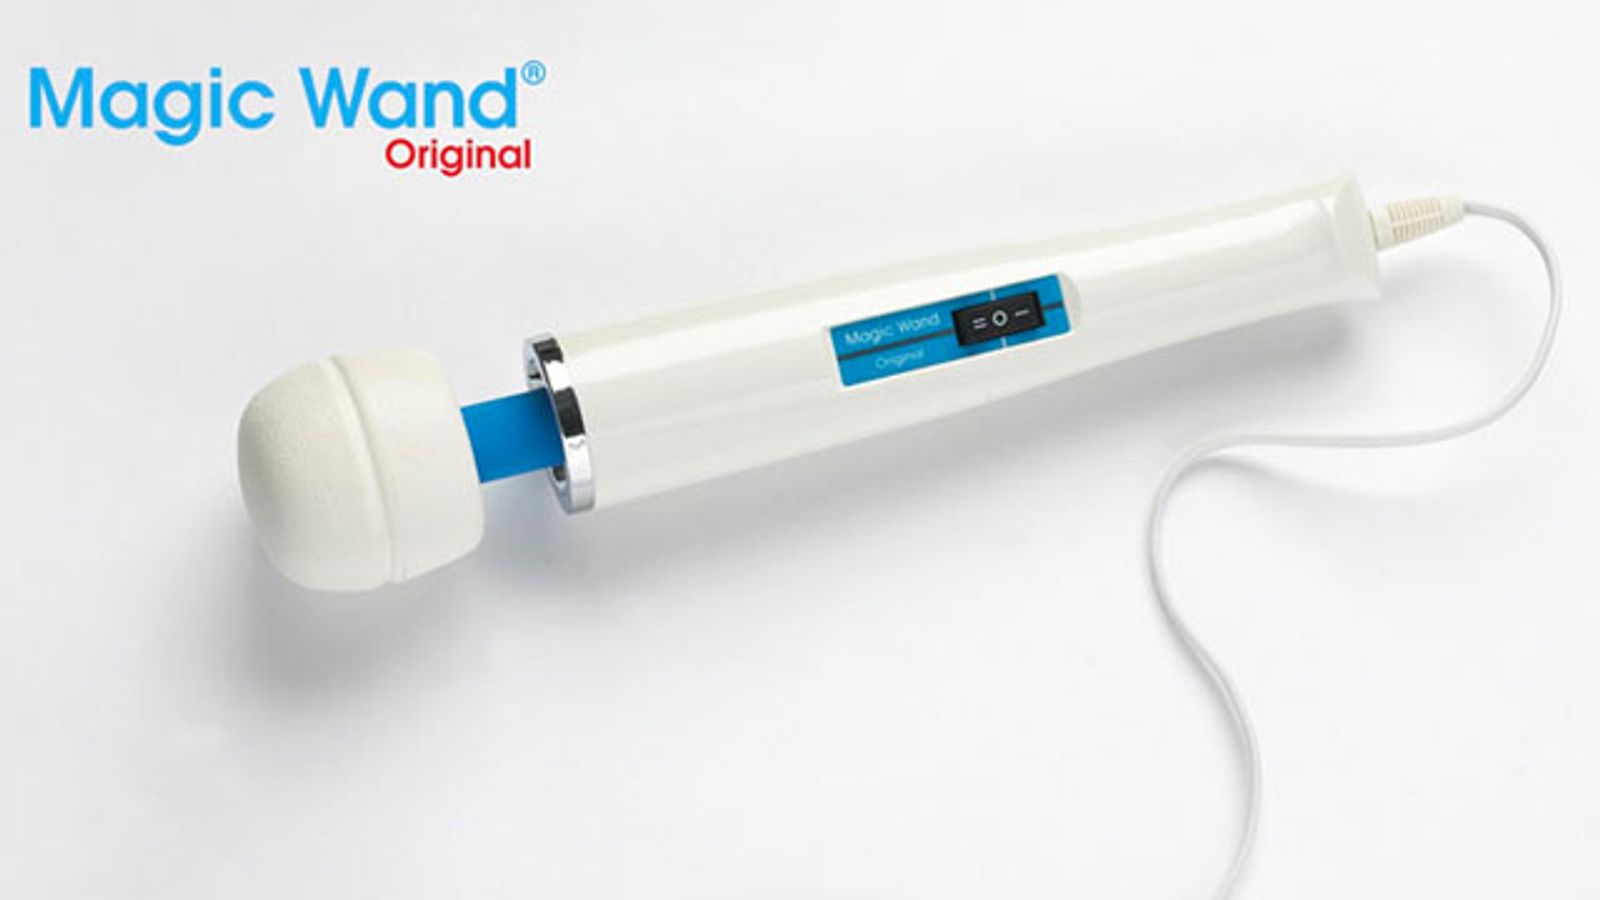 Magic Wand Lands In Top 10 Of Most Influential Gadgets In Time Magazine